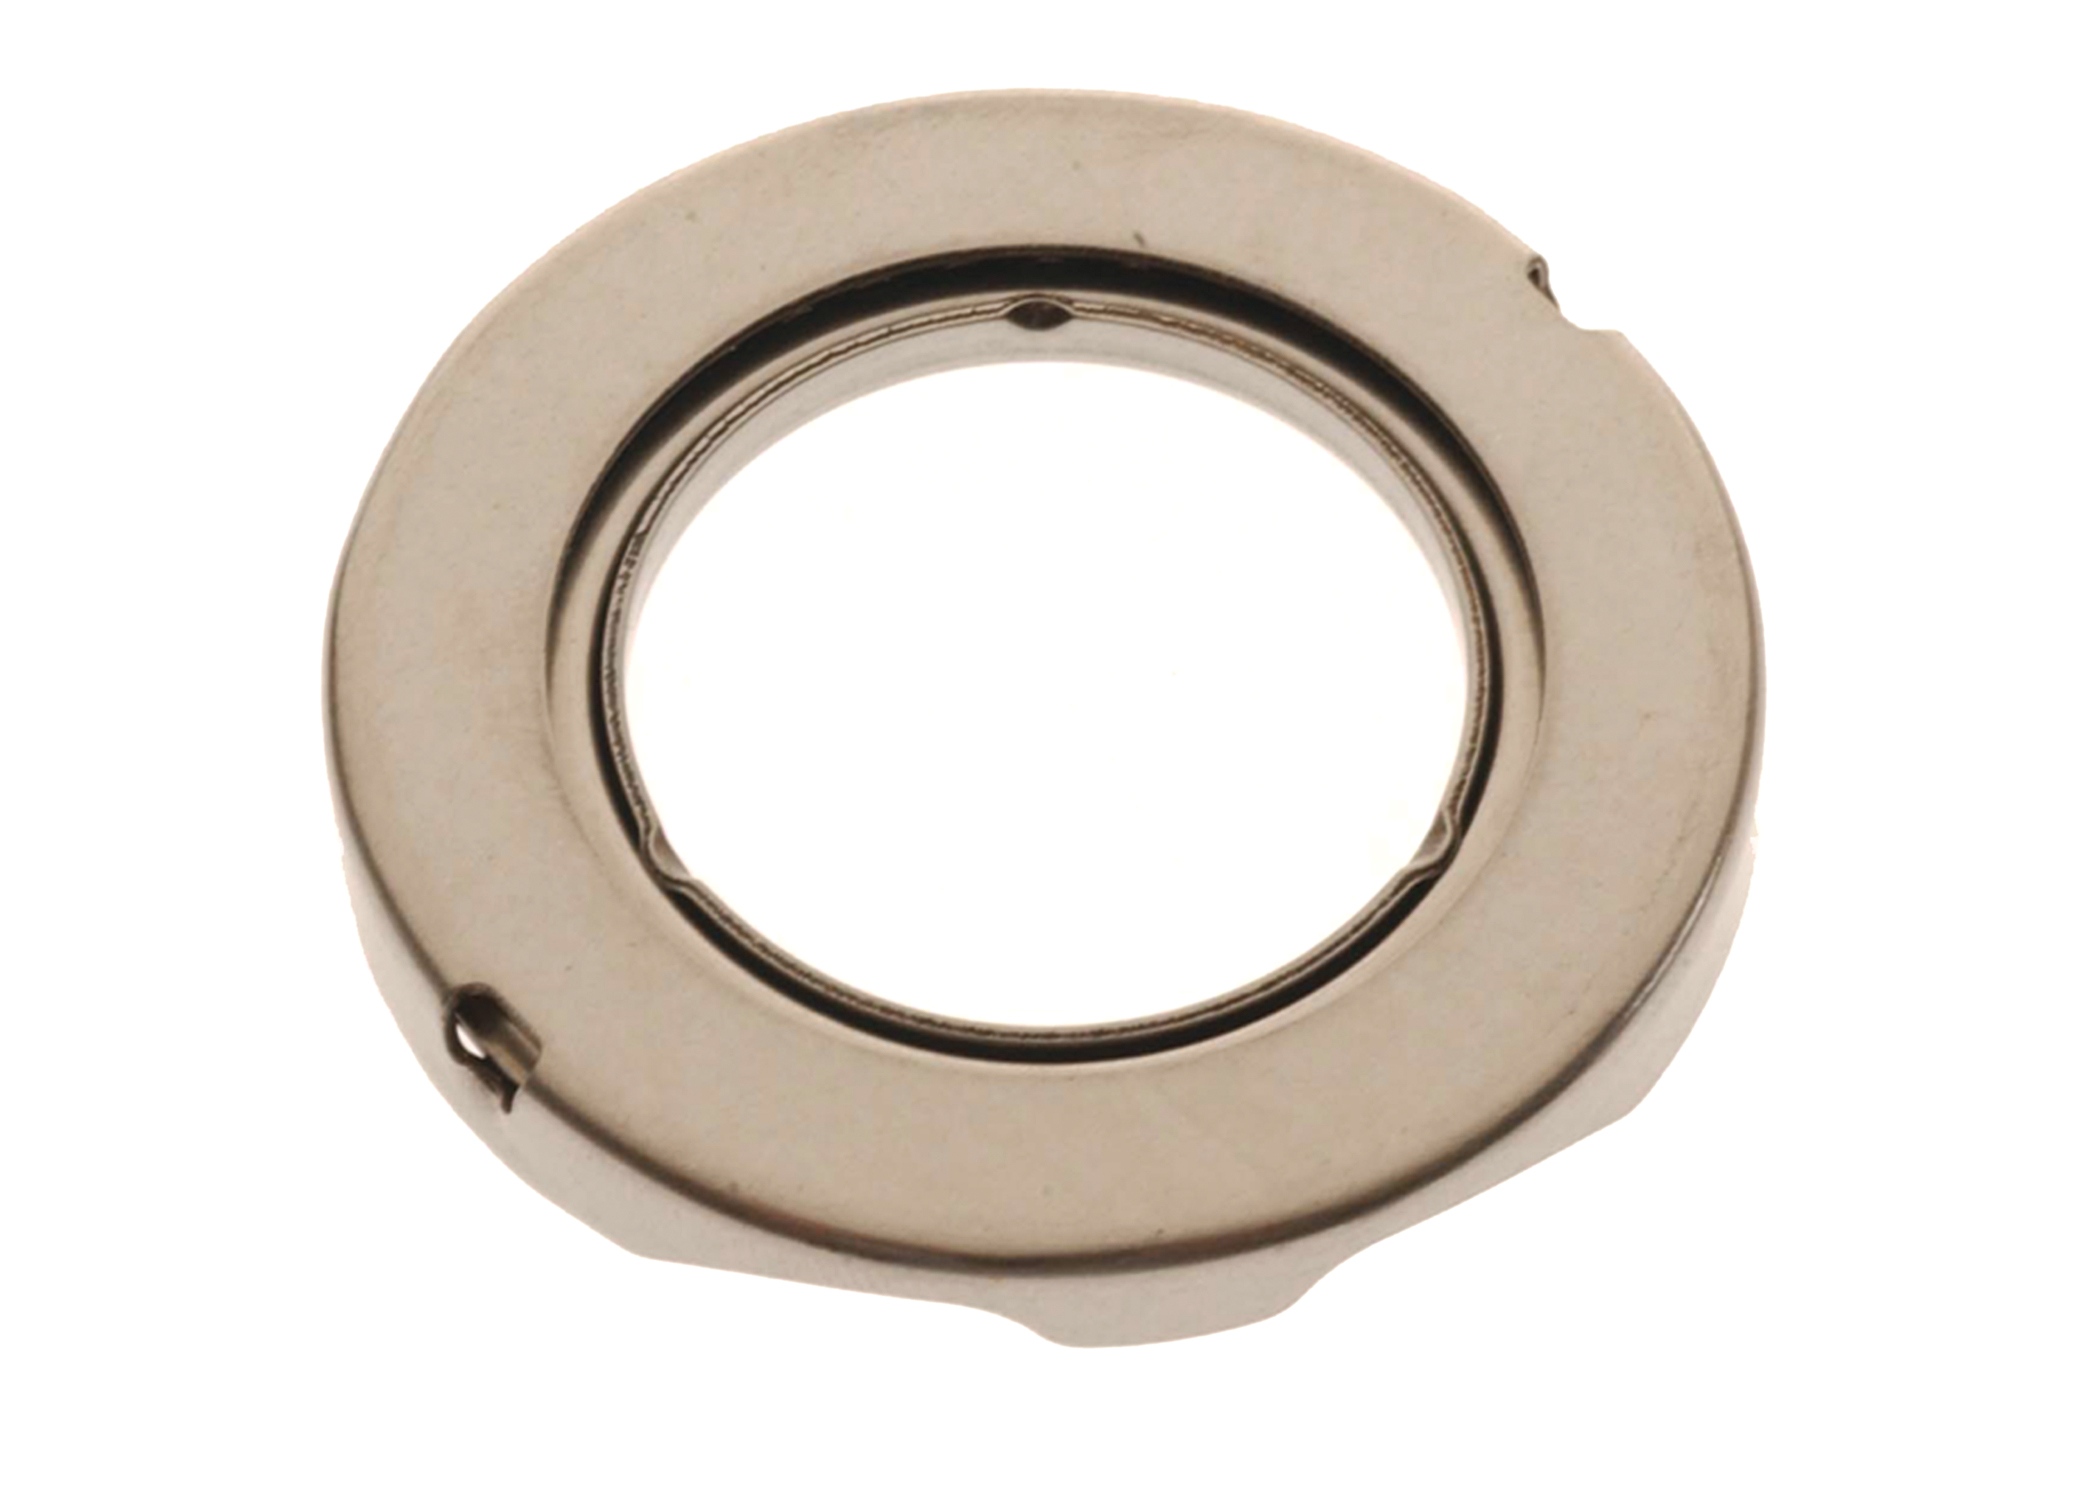 GM GENUINE PARTS - Automatic Transmission Input Sun Gear Thrust Bearing - GMP 8642162